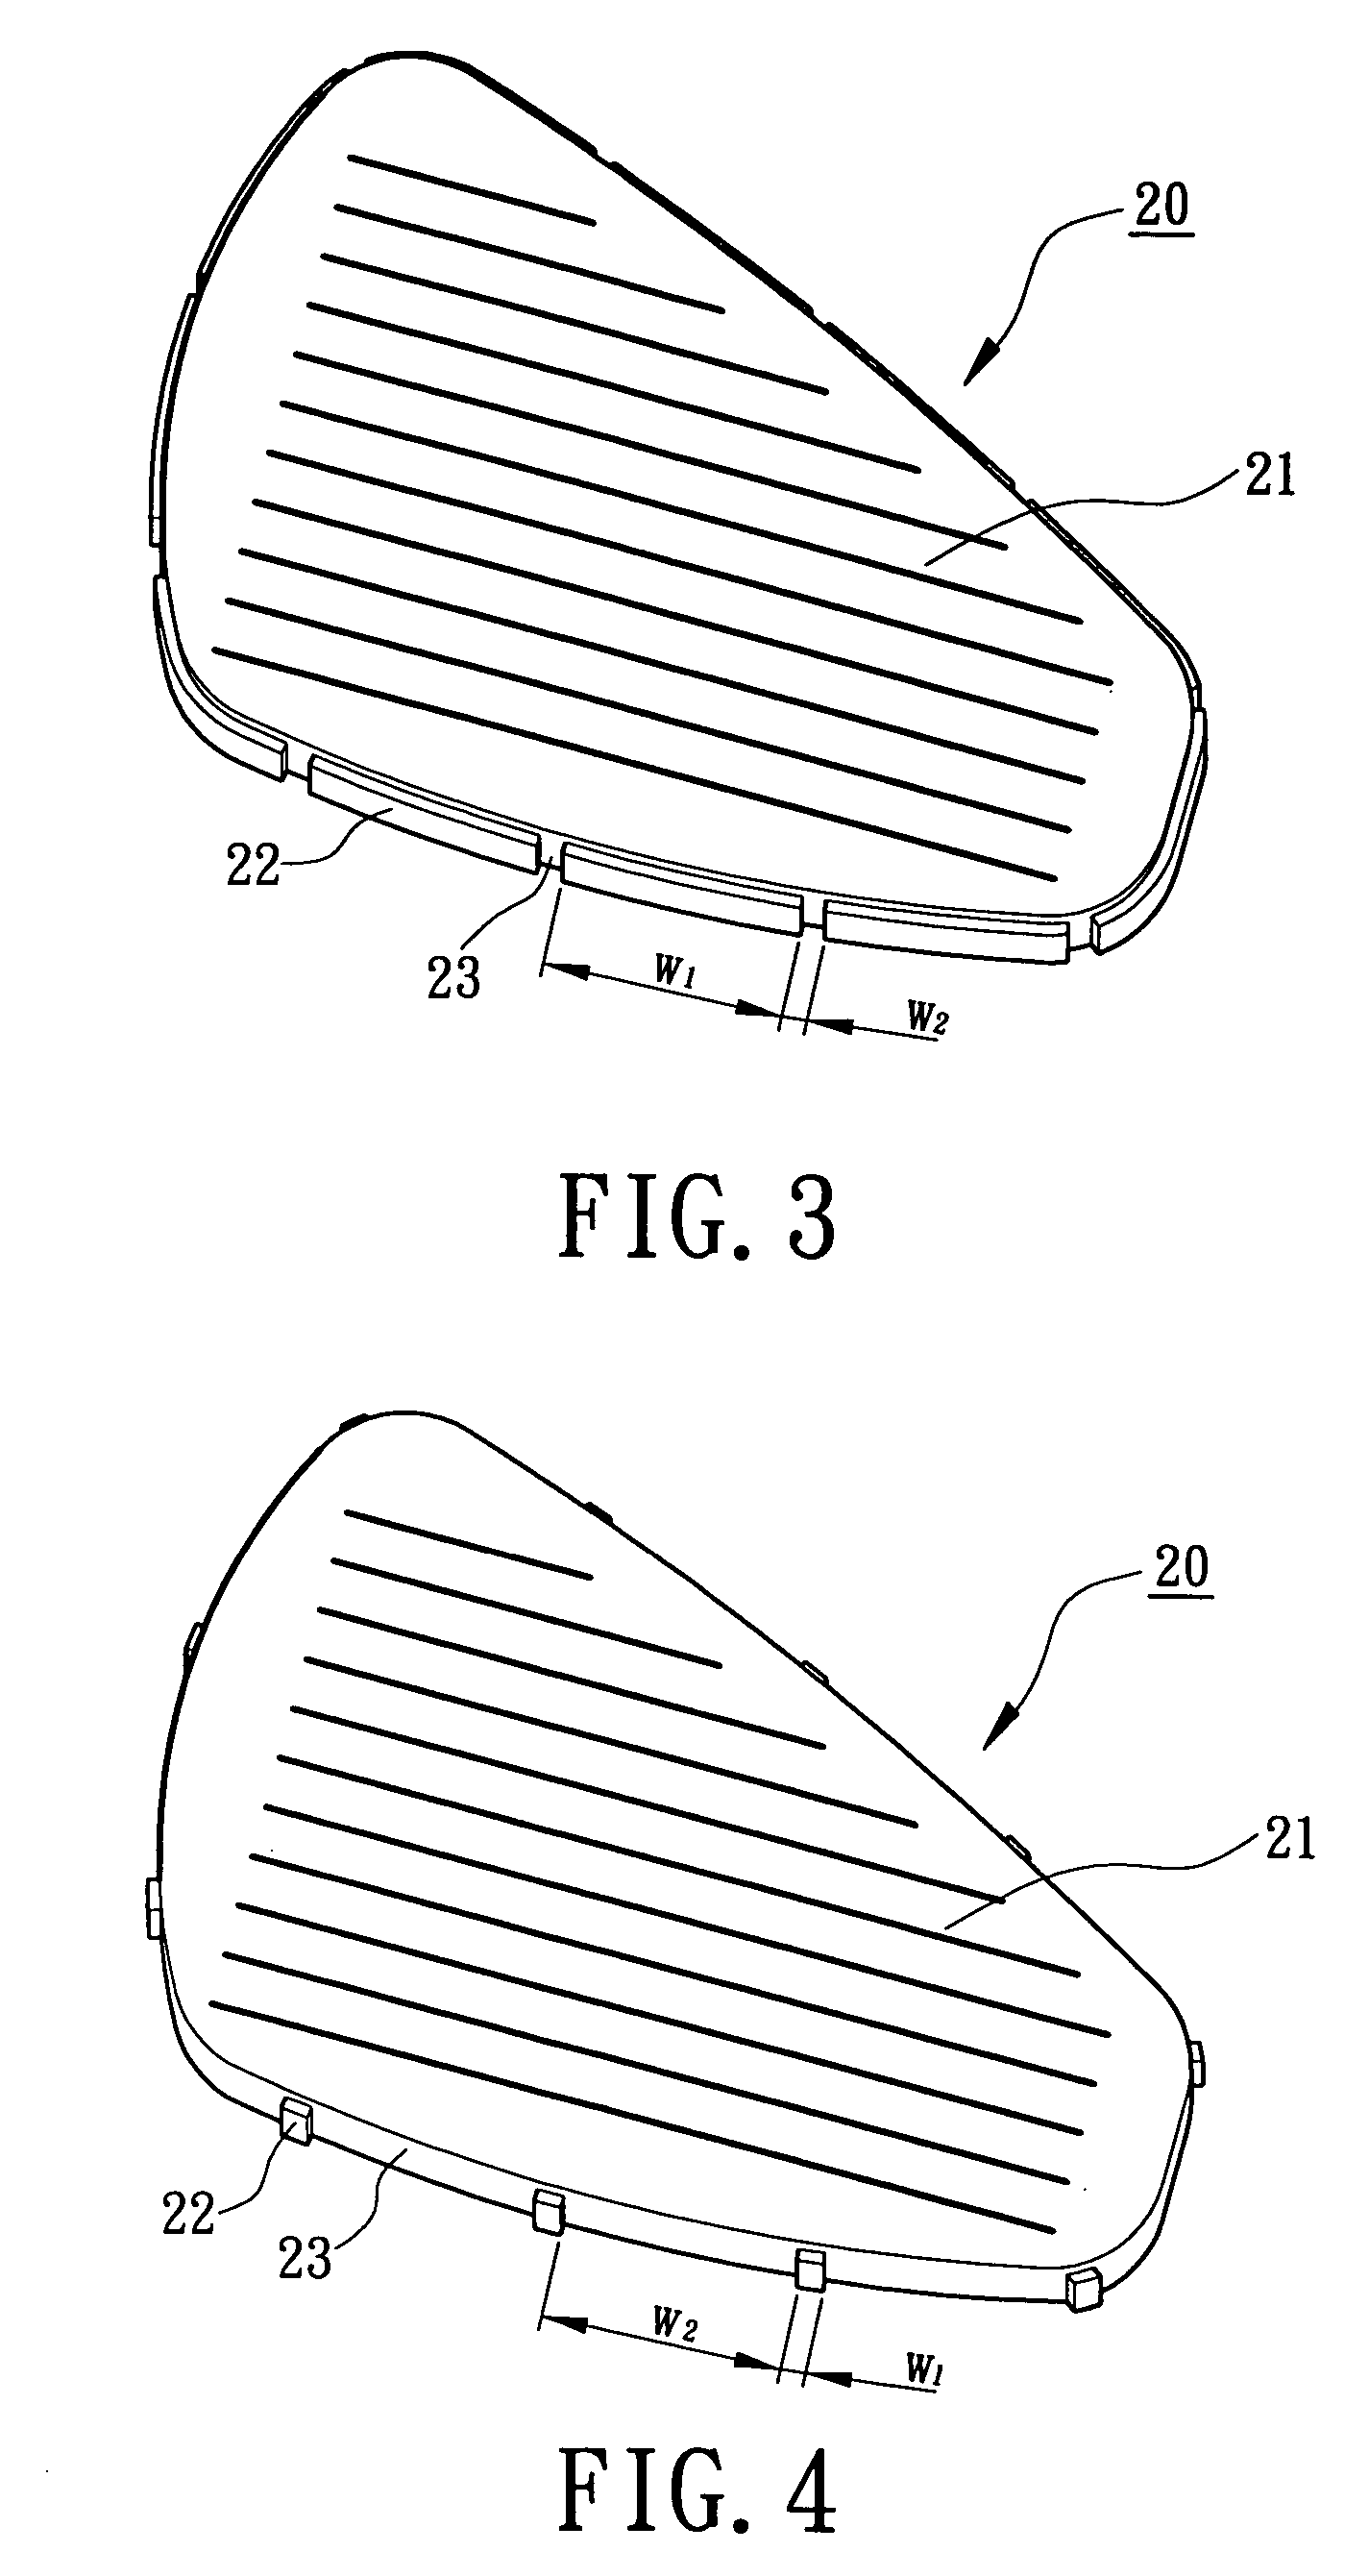 Connecting structure for a striking plate of a golf club head